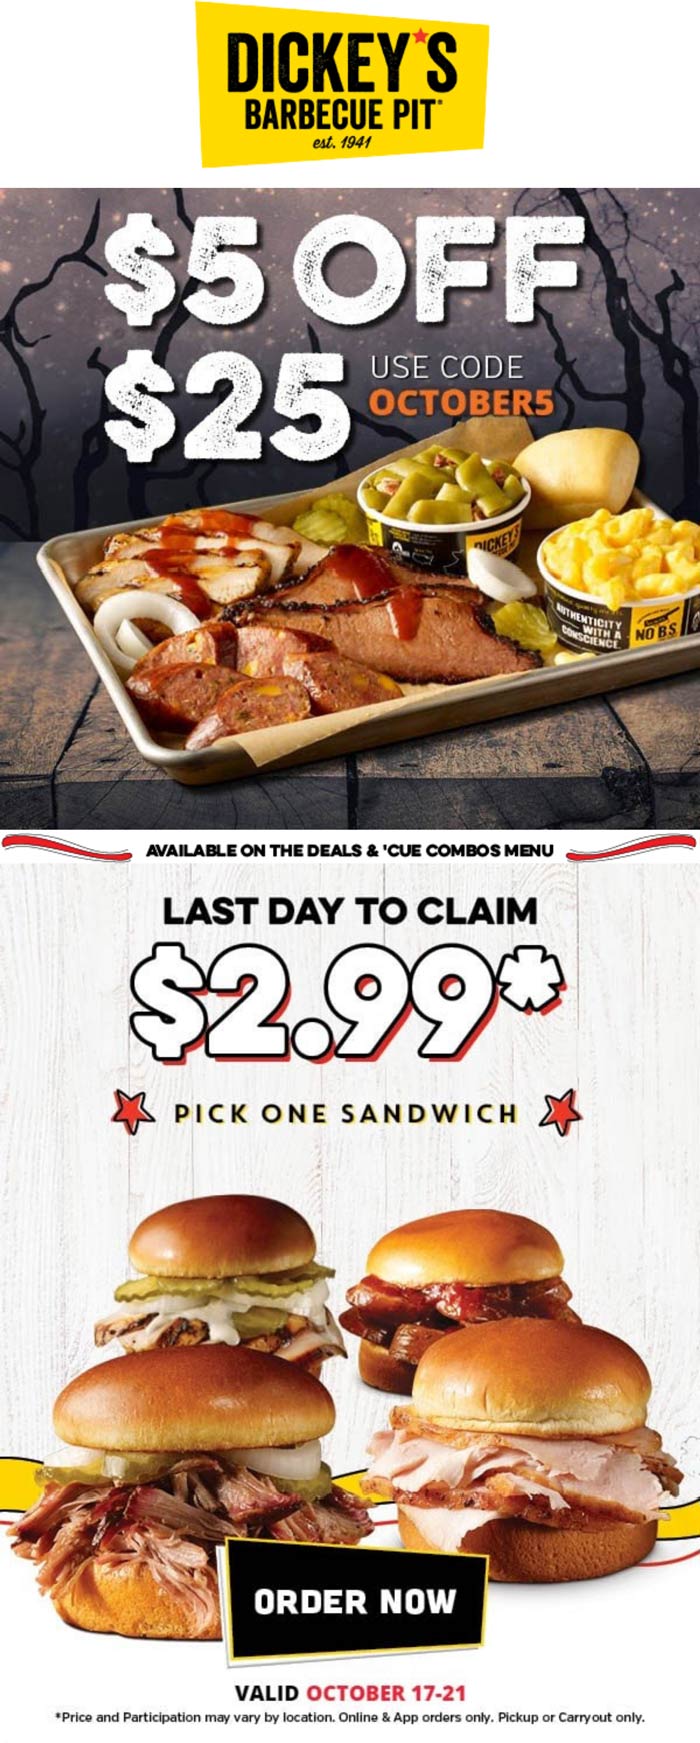 Dickeys Barbecue Pit restaurants Coupon  $5 off $25 at Dickeys Barbecue Pit restaurants via promo code OCTOBER5 #dickeysbarbecuepit 